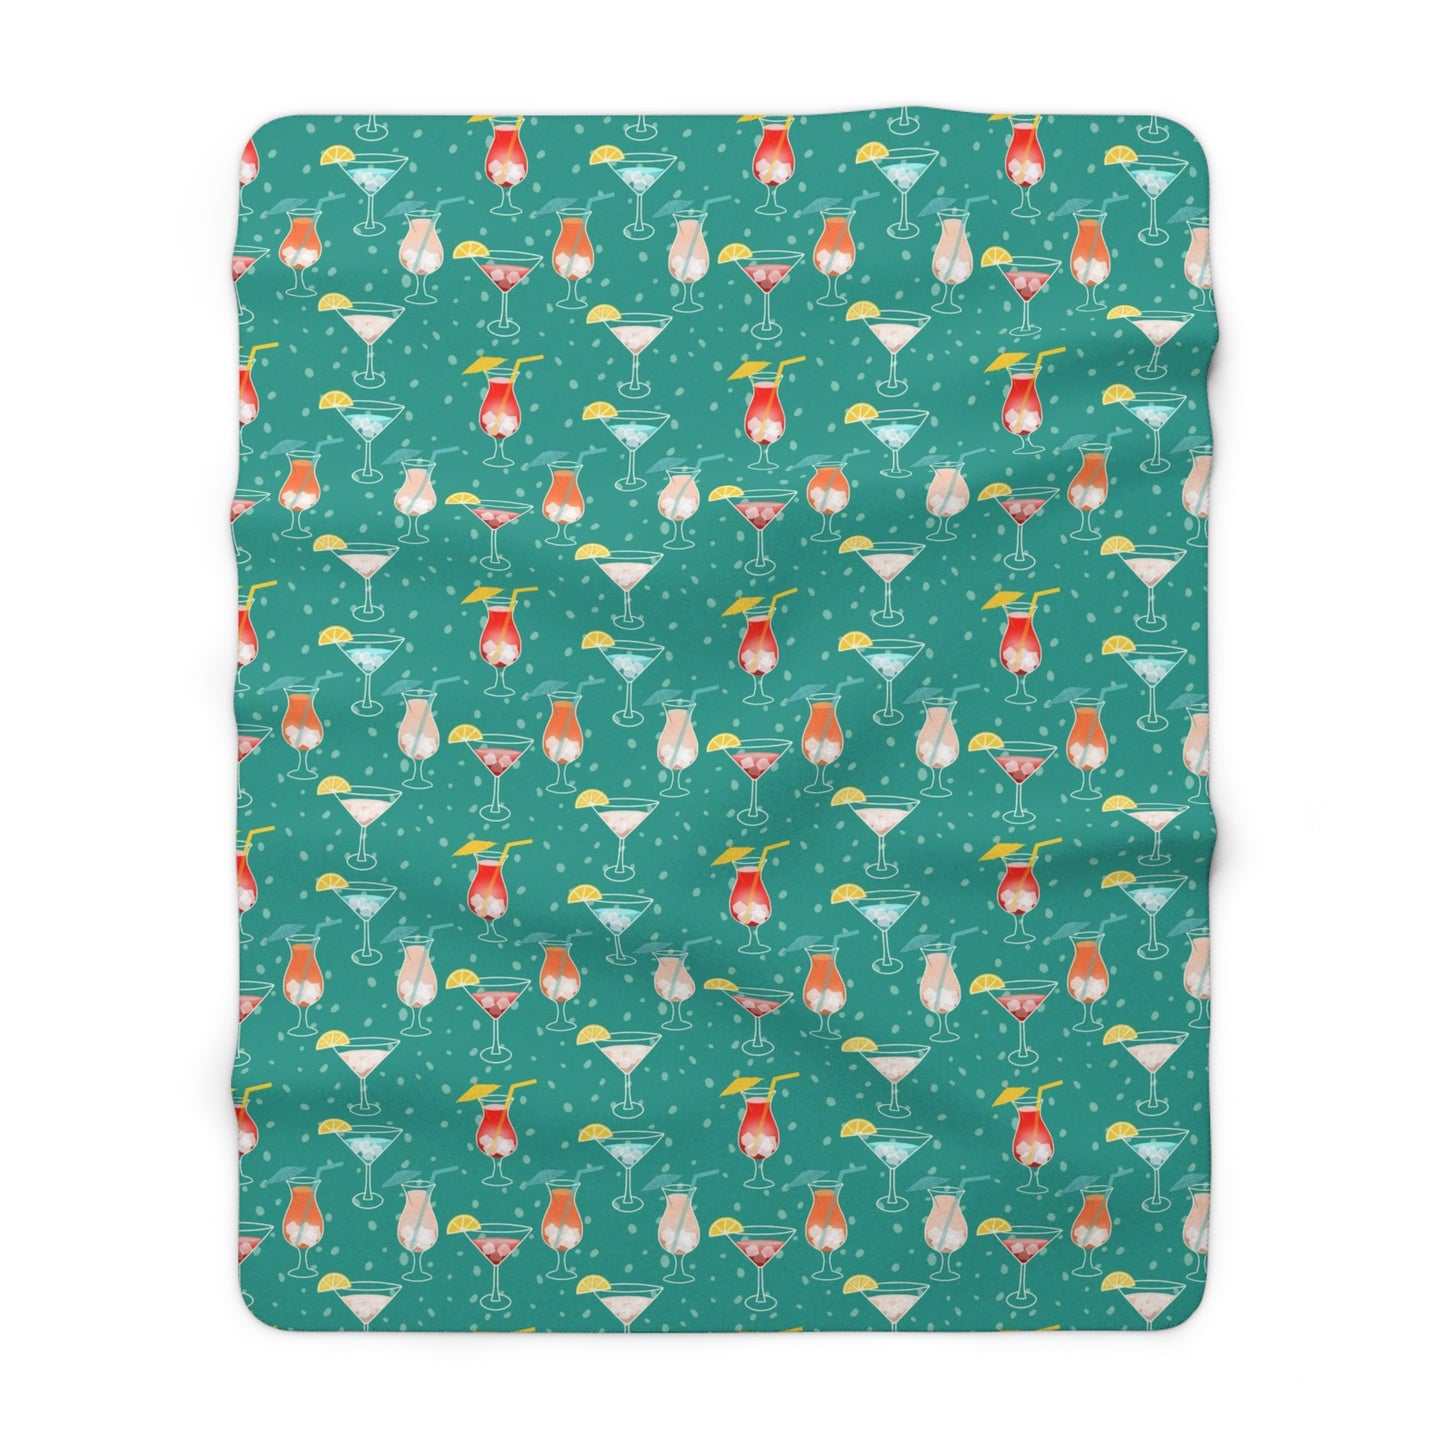 Cocktails Sherpa Fleece Blanket: Colorful Drinks Party